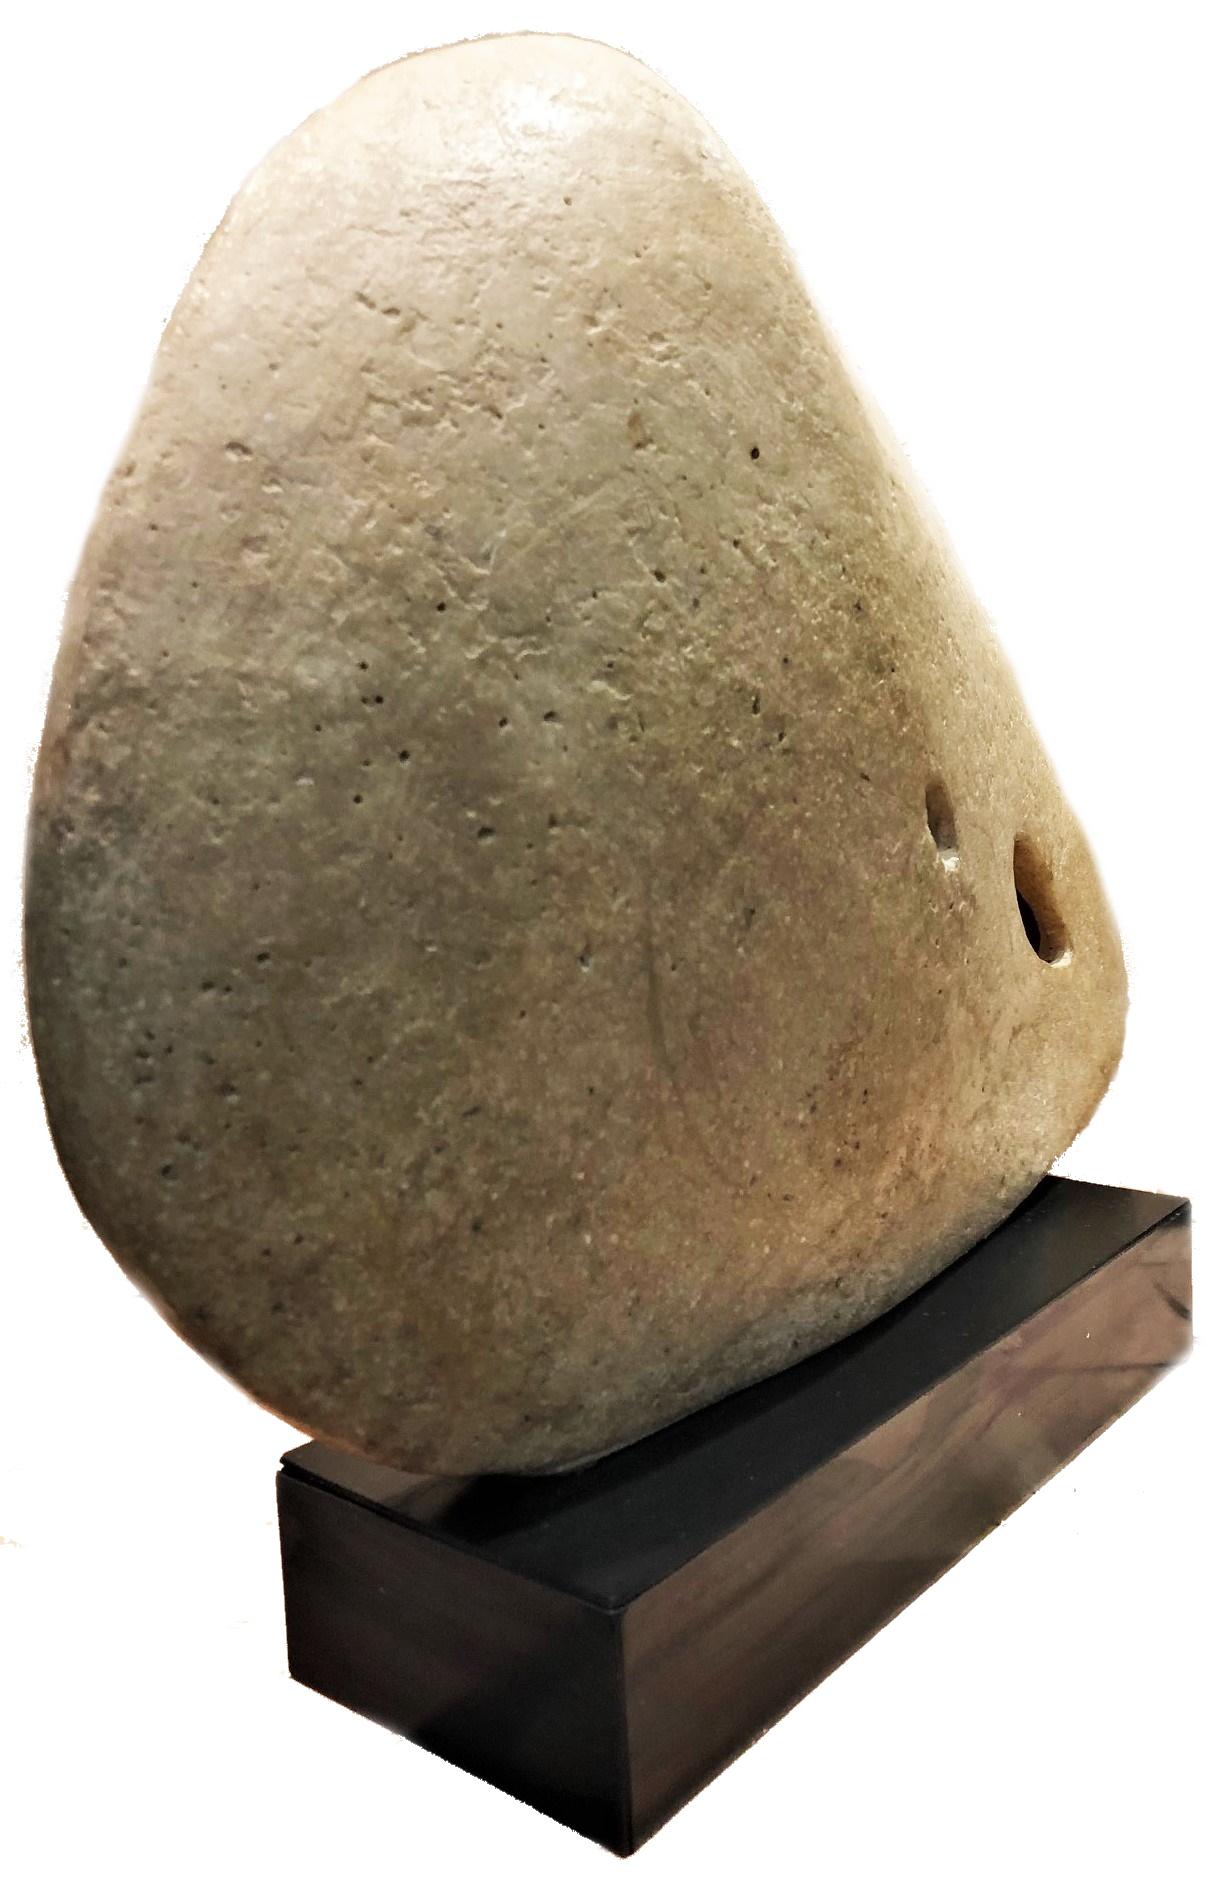 Modern Rhys Caparn, Extraterrestial, American Mid-Century Cast Stone Sculpture, 1969 For Sale